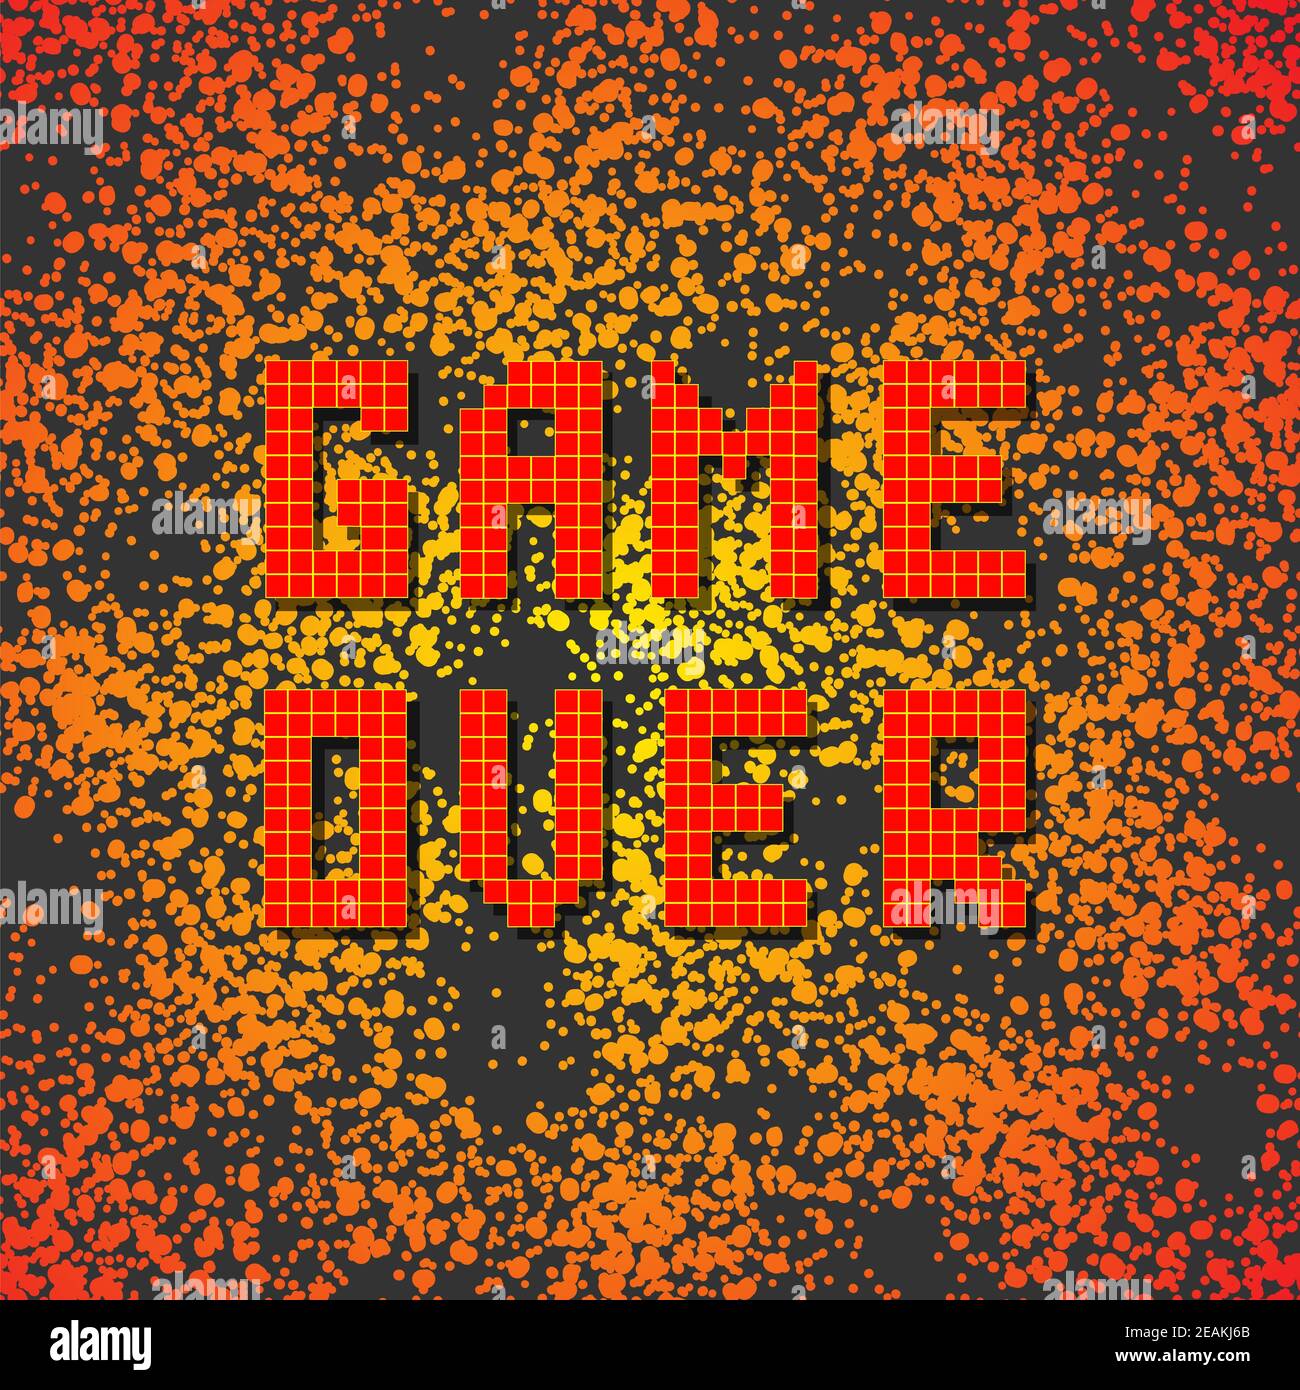 Retro Game Over Sign with Red Drops on Dark Background. Gaming Concept. Video Game Screen Stock Photo